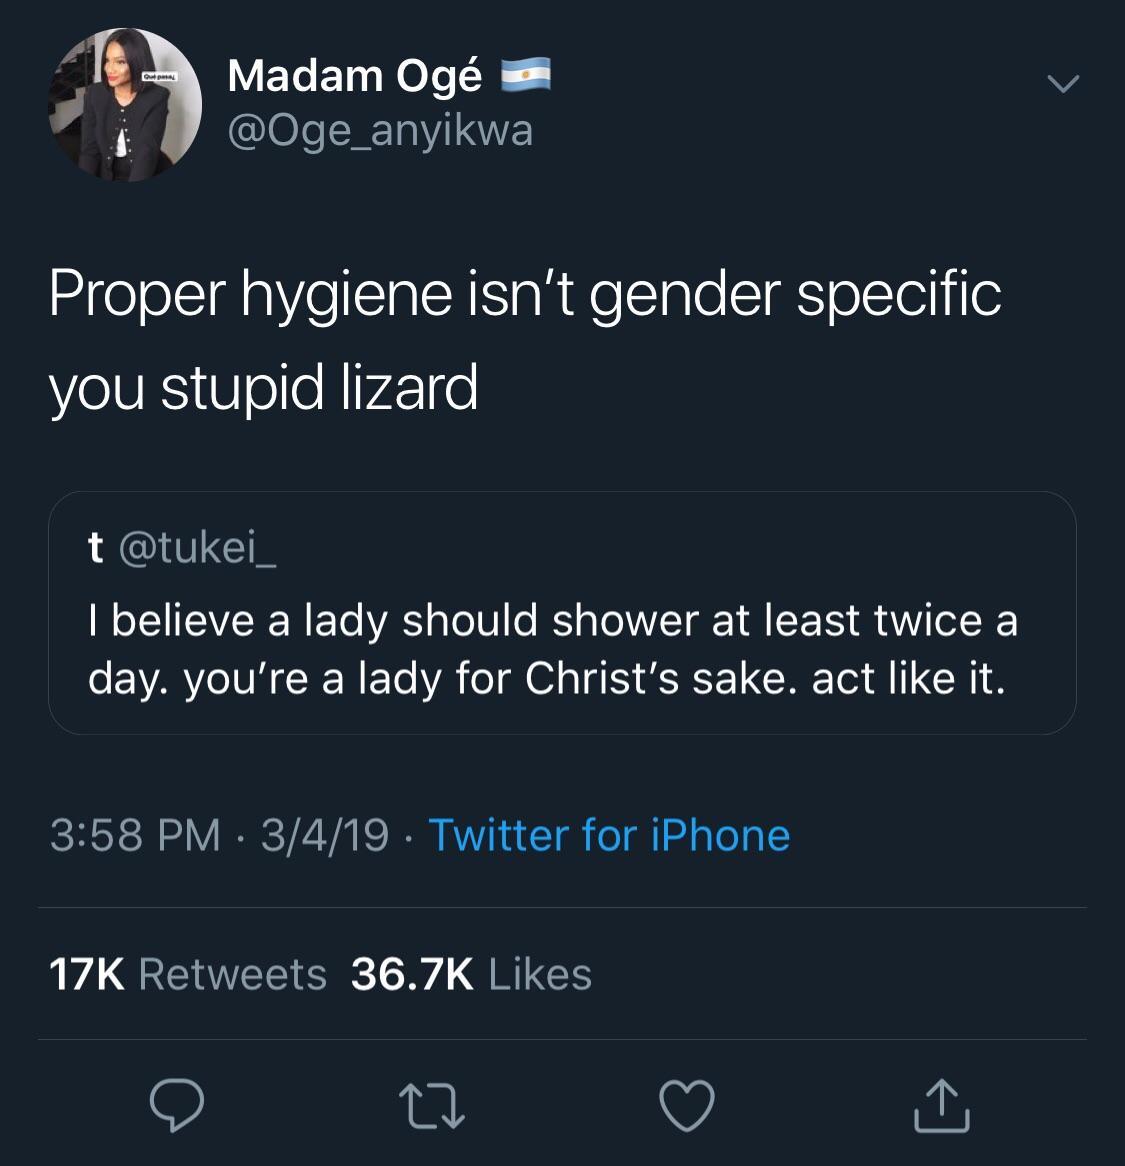 screenshot - Madam Og o Proper hygiene isn't gender specific you stupid lizard t I believe a lady should shower at least twice a day. you're a lady for Christ's sake. act it. 3419 Twitter for iPhone 17K